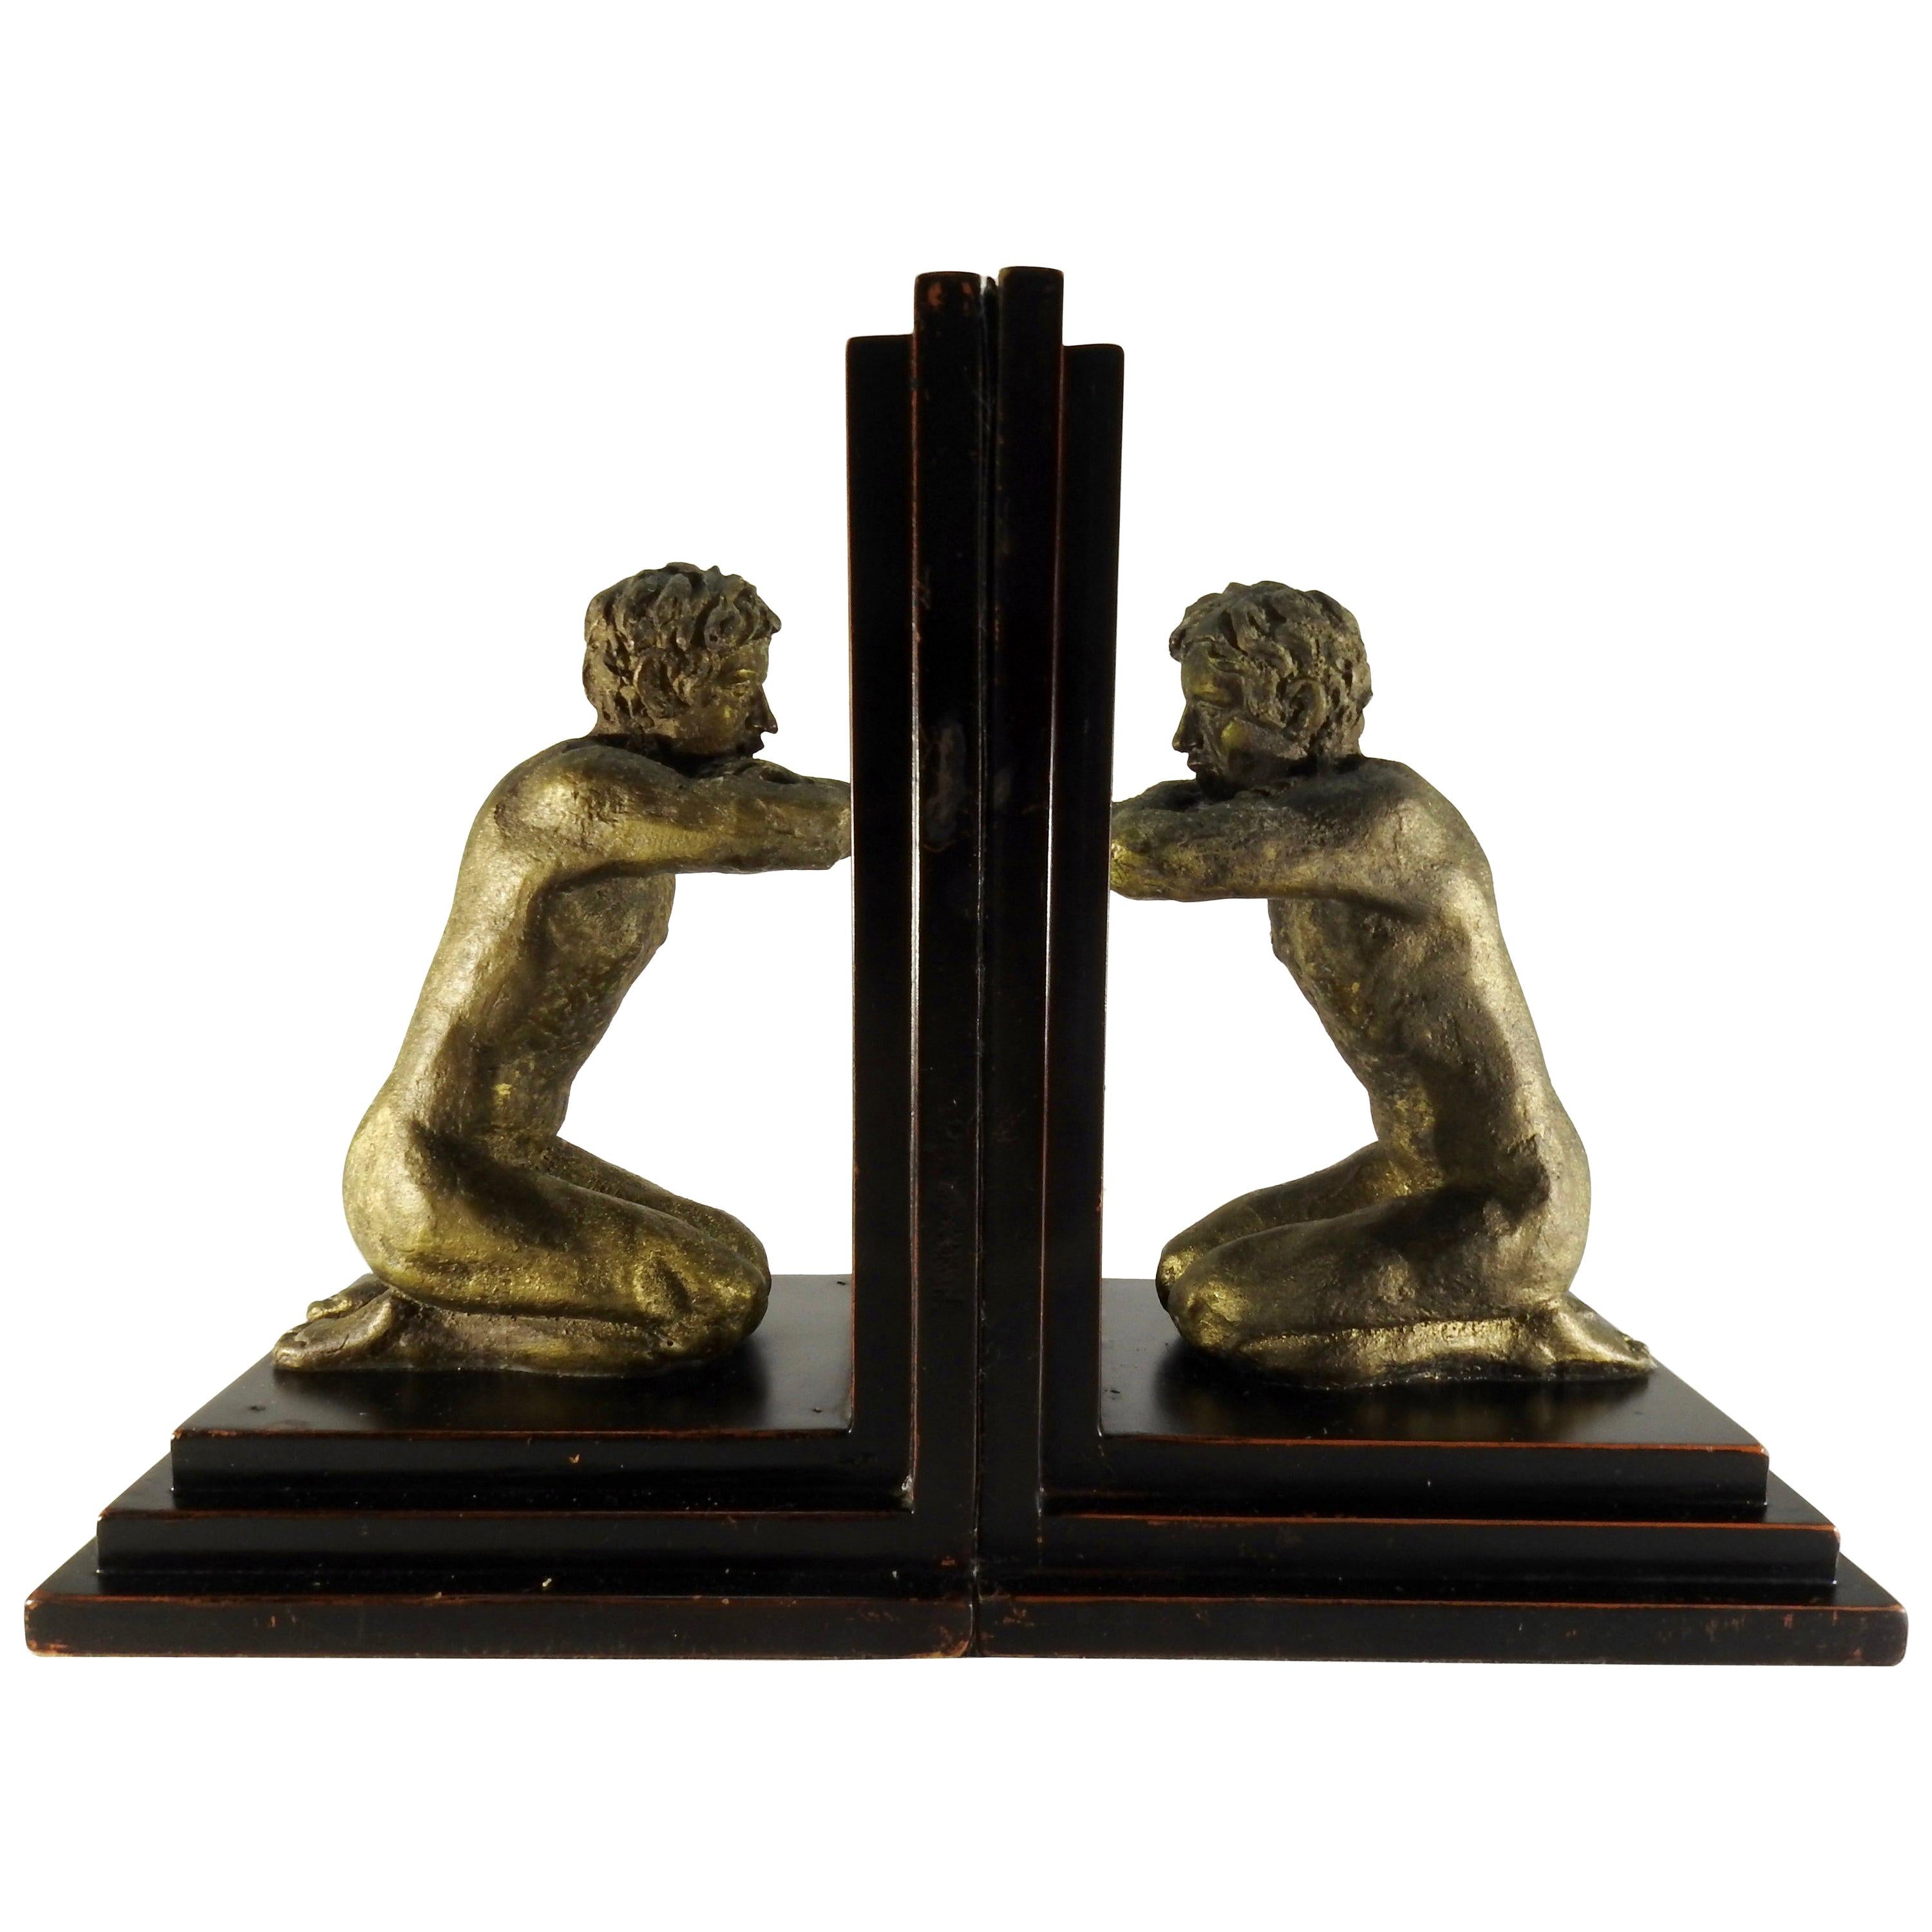 Kneeling Men's on Wood Bookends with Mirrors For Sale